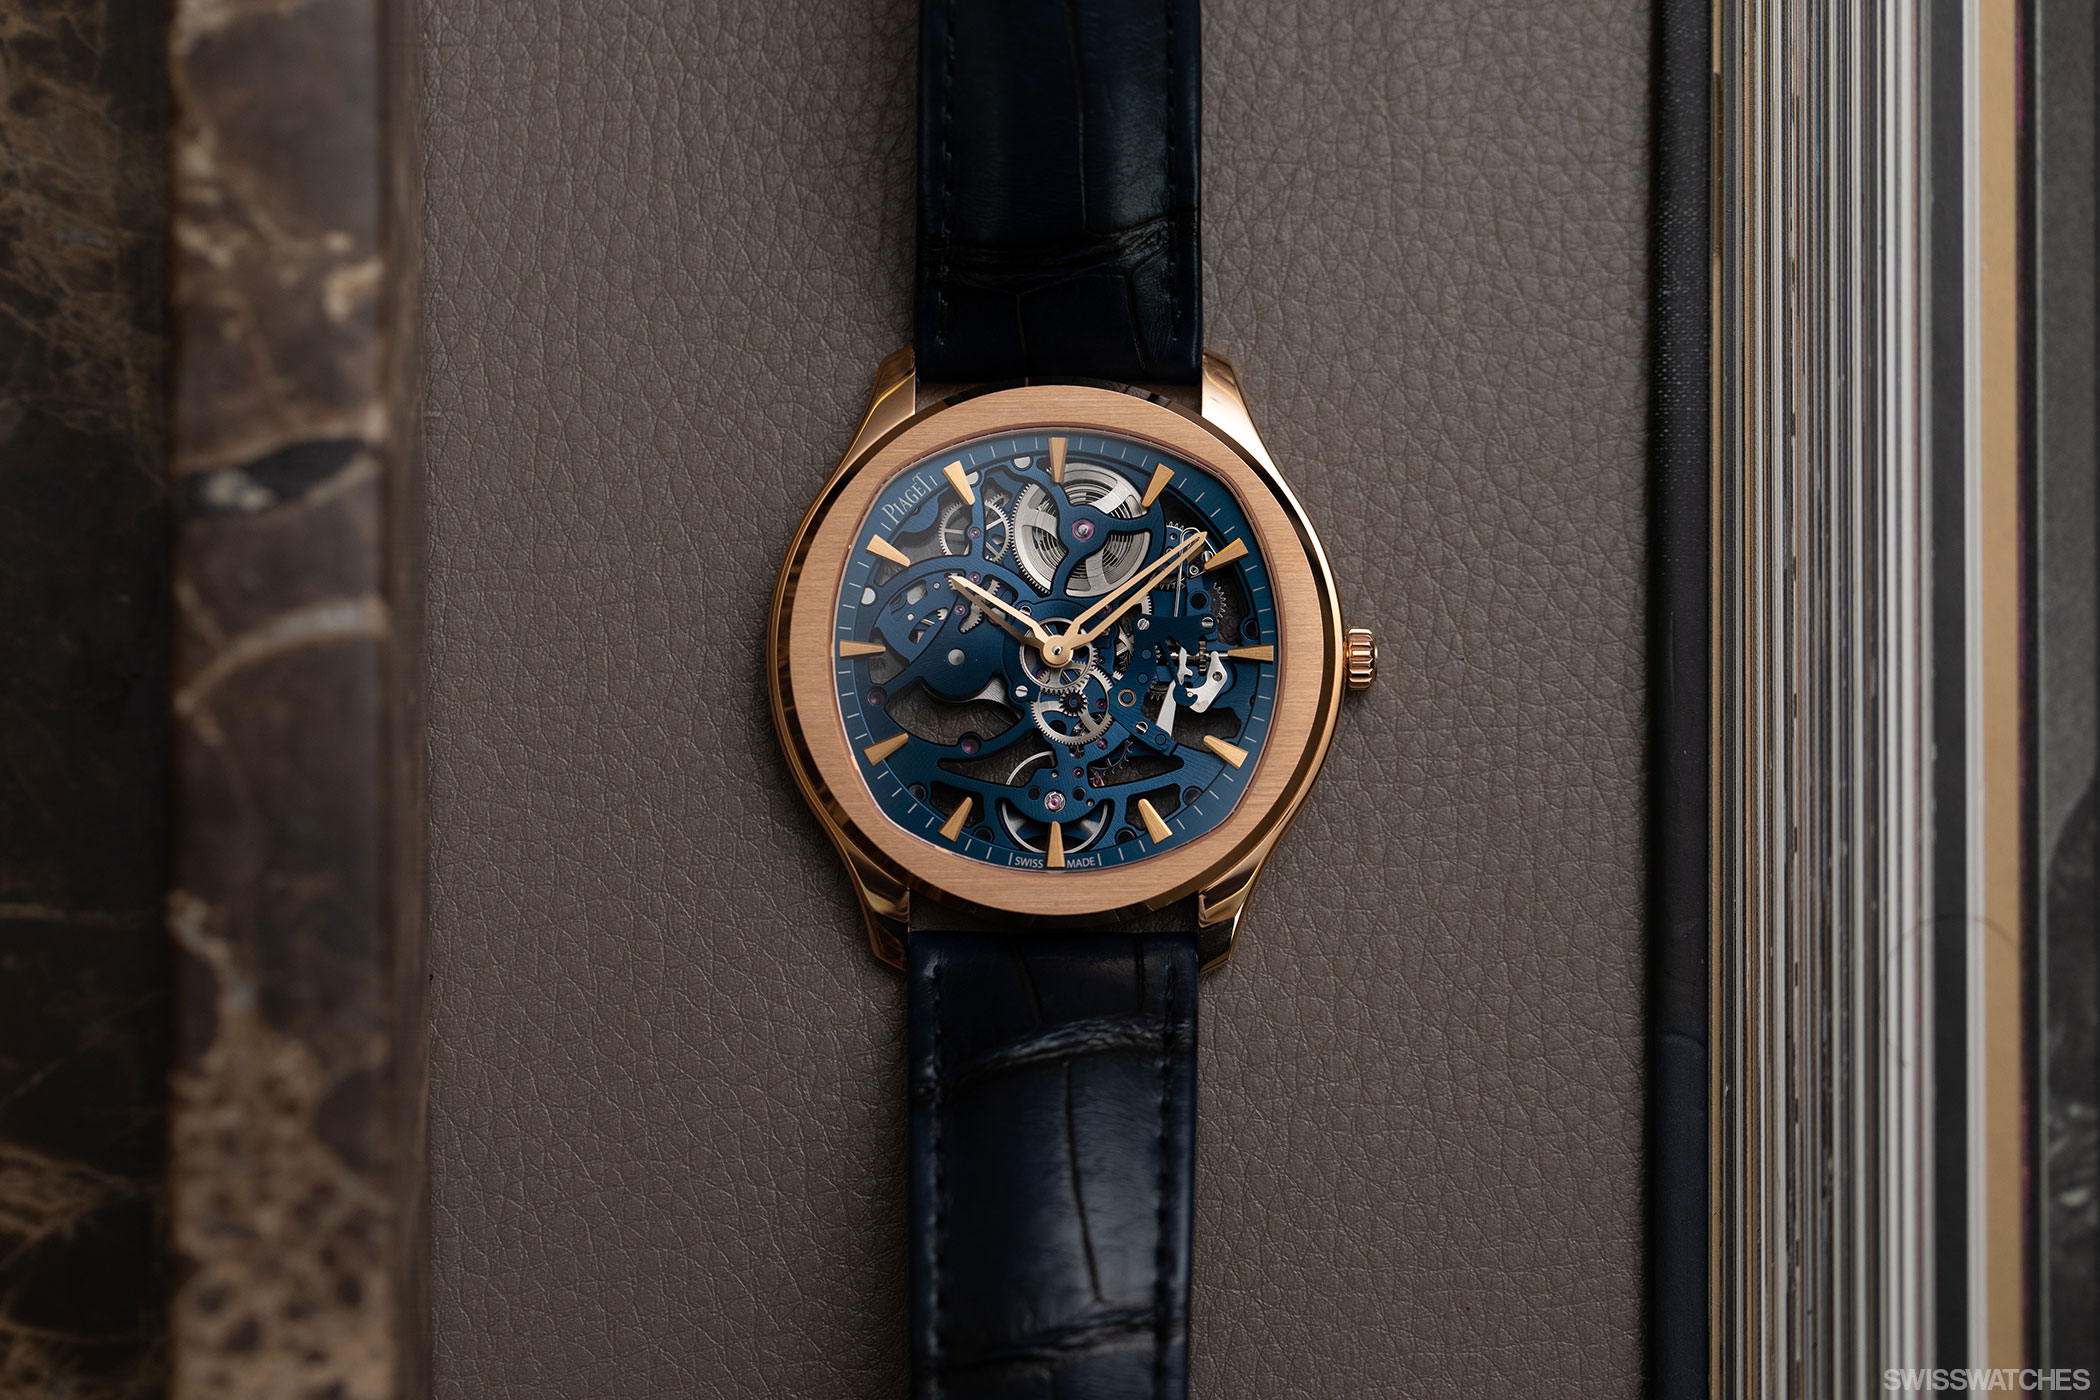 Introducing the Piaget Polo Date 36mm - Revolution Watch